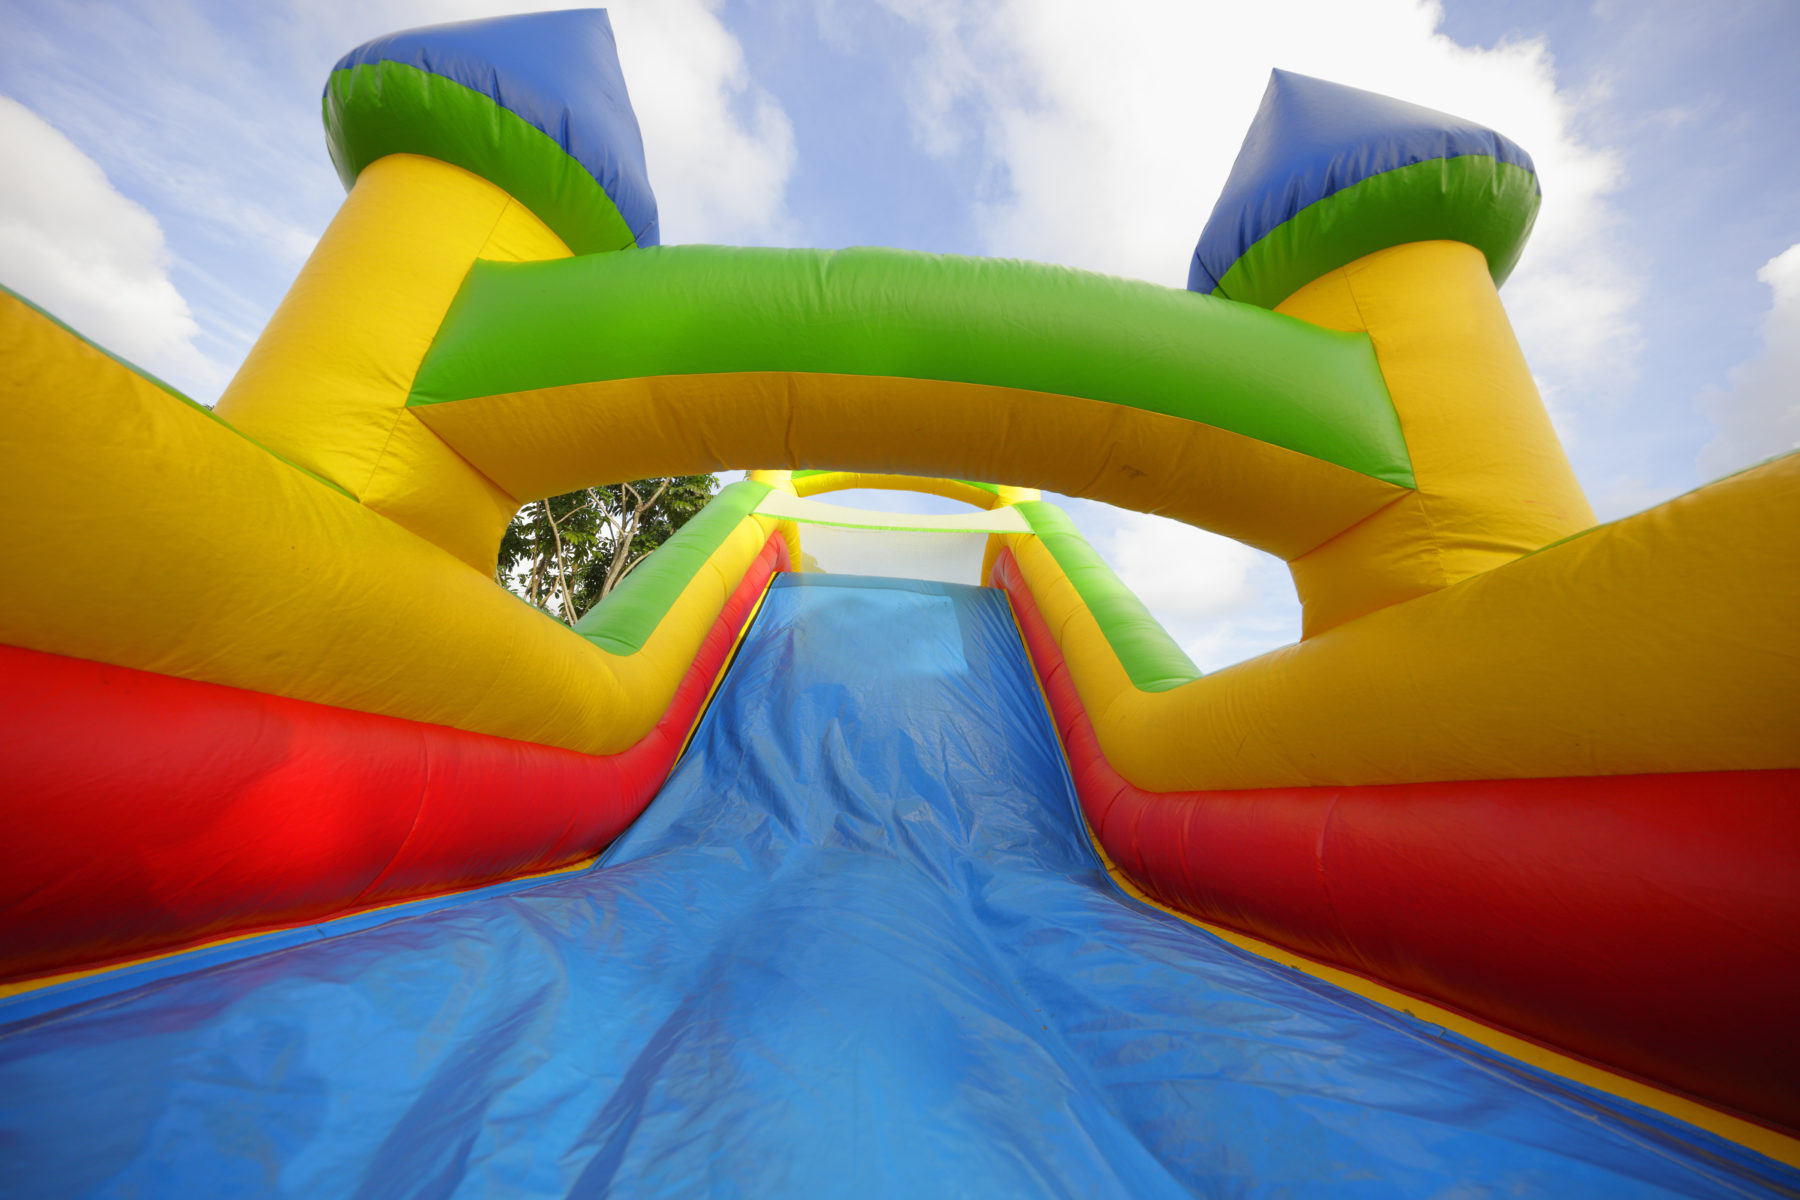 Safety Tips for Inflatable Play Equipment